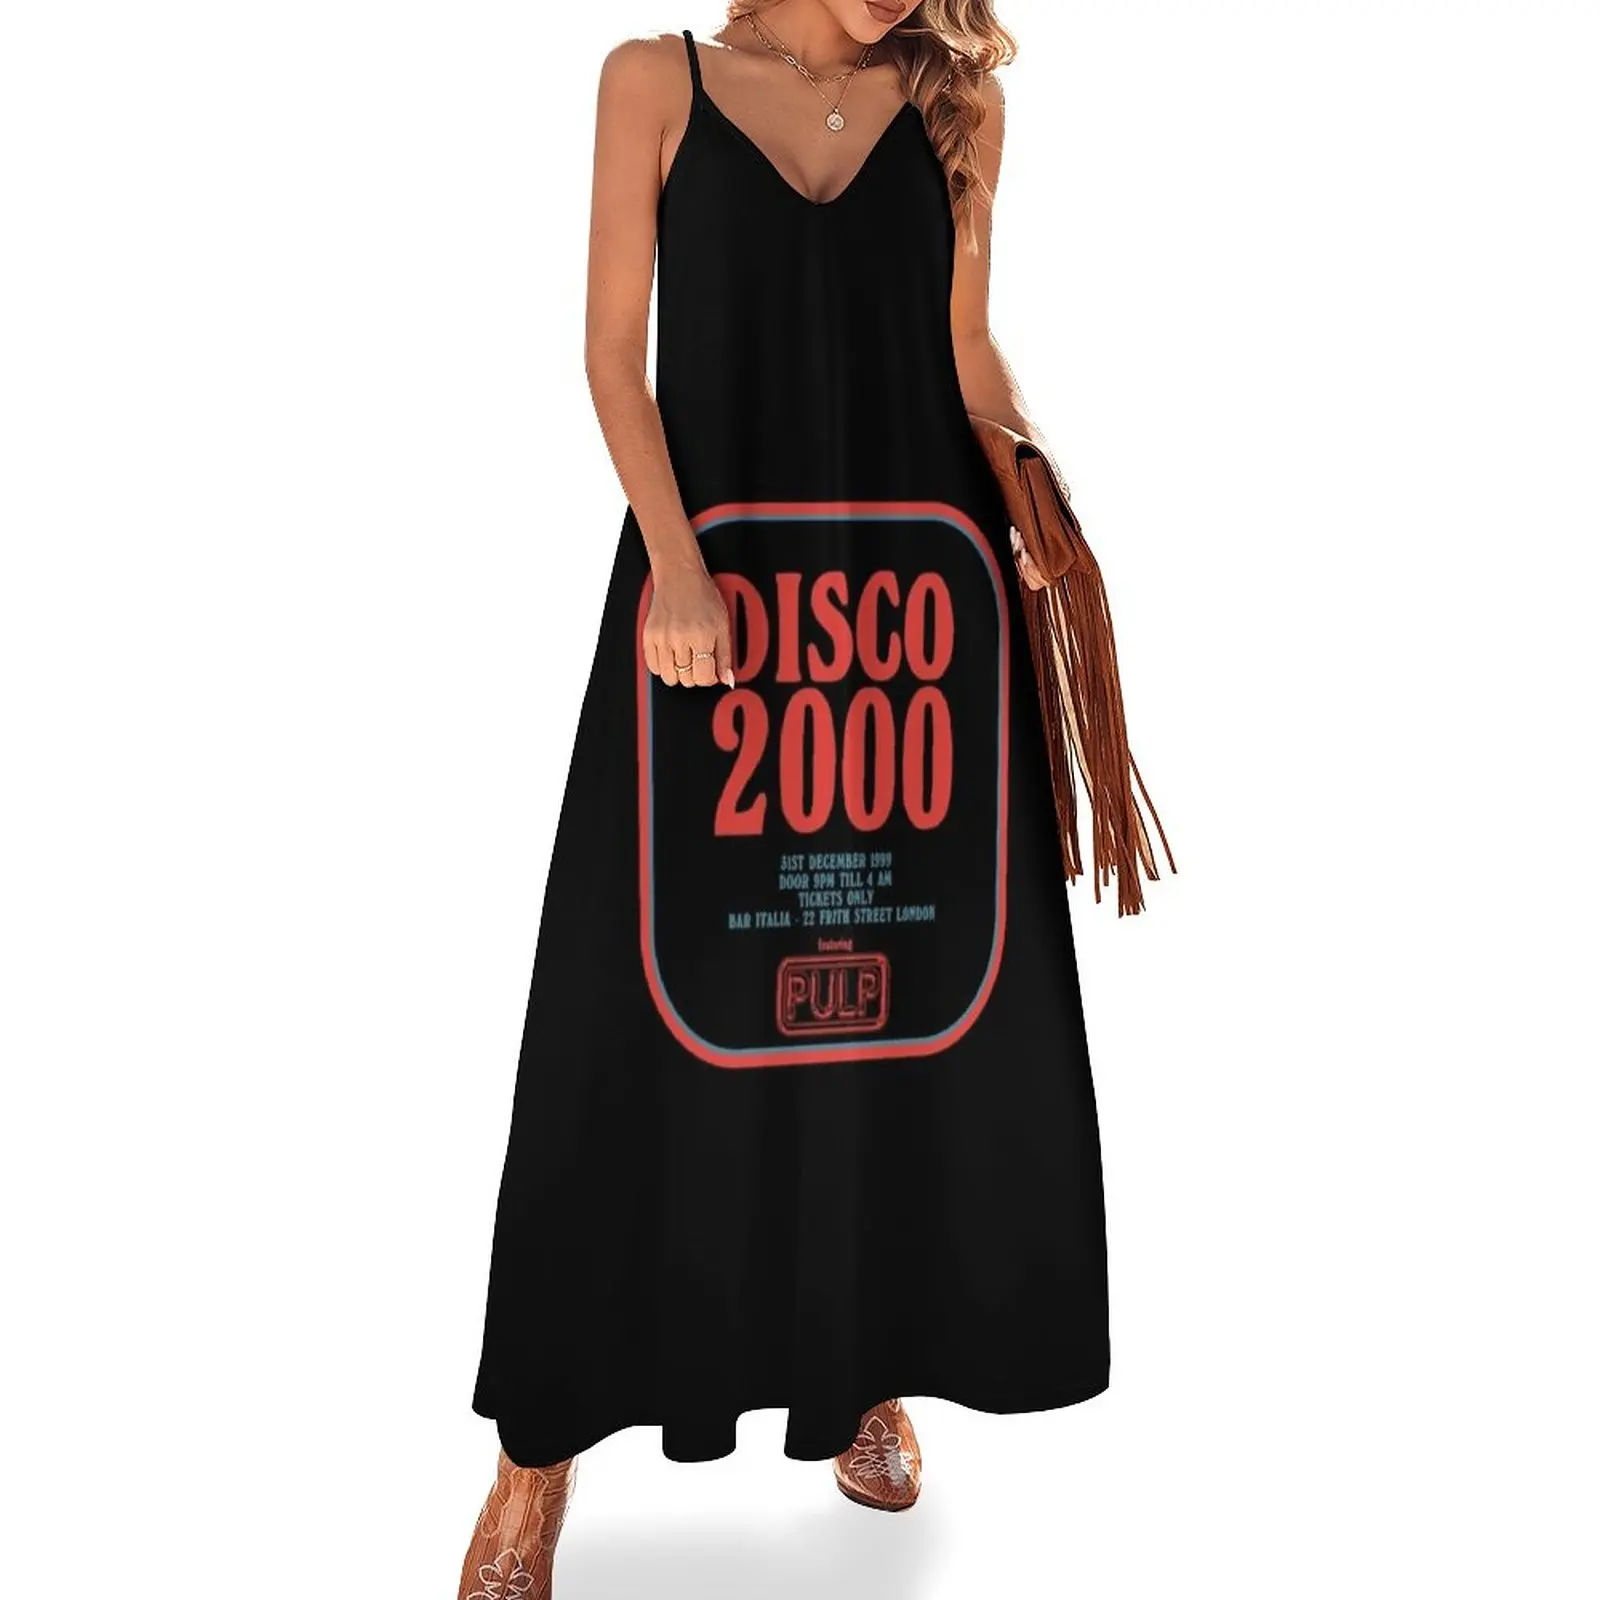 

Pulp - Disco 2000 - Red and Blue Classic Sleeveless Dress dresses for official occasions women's summer jumpsuit summer dresses